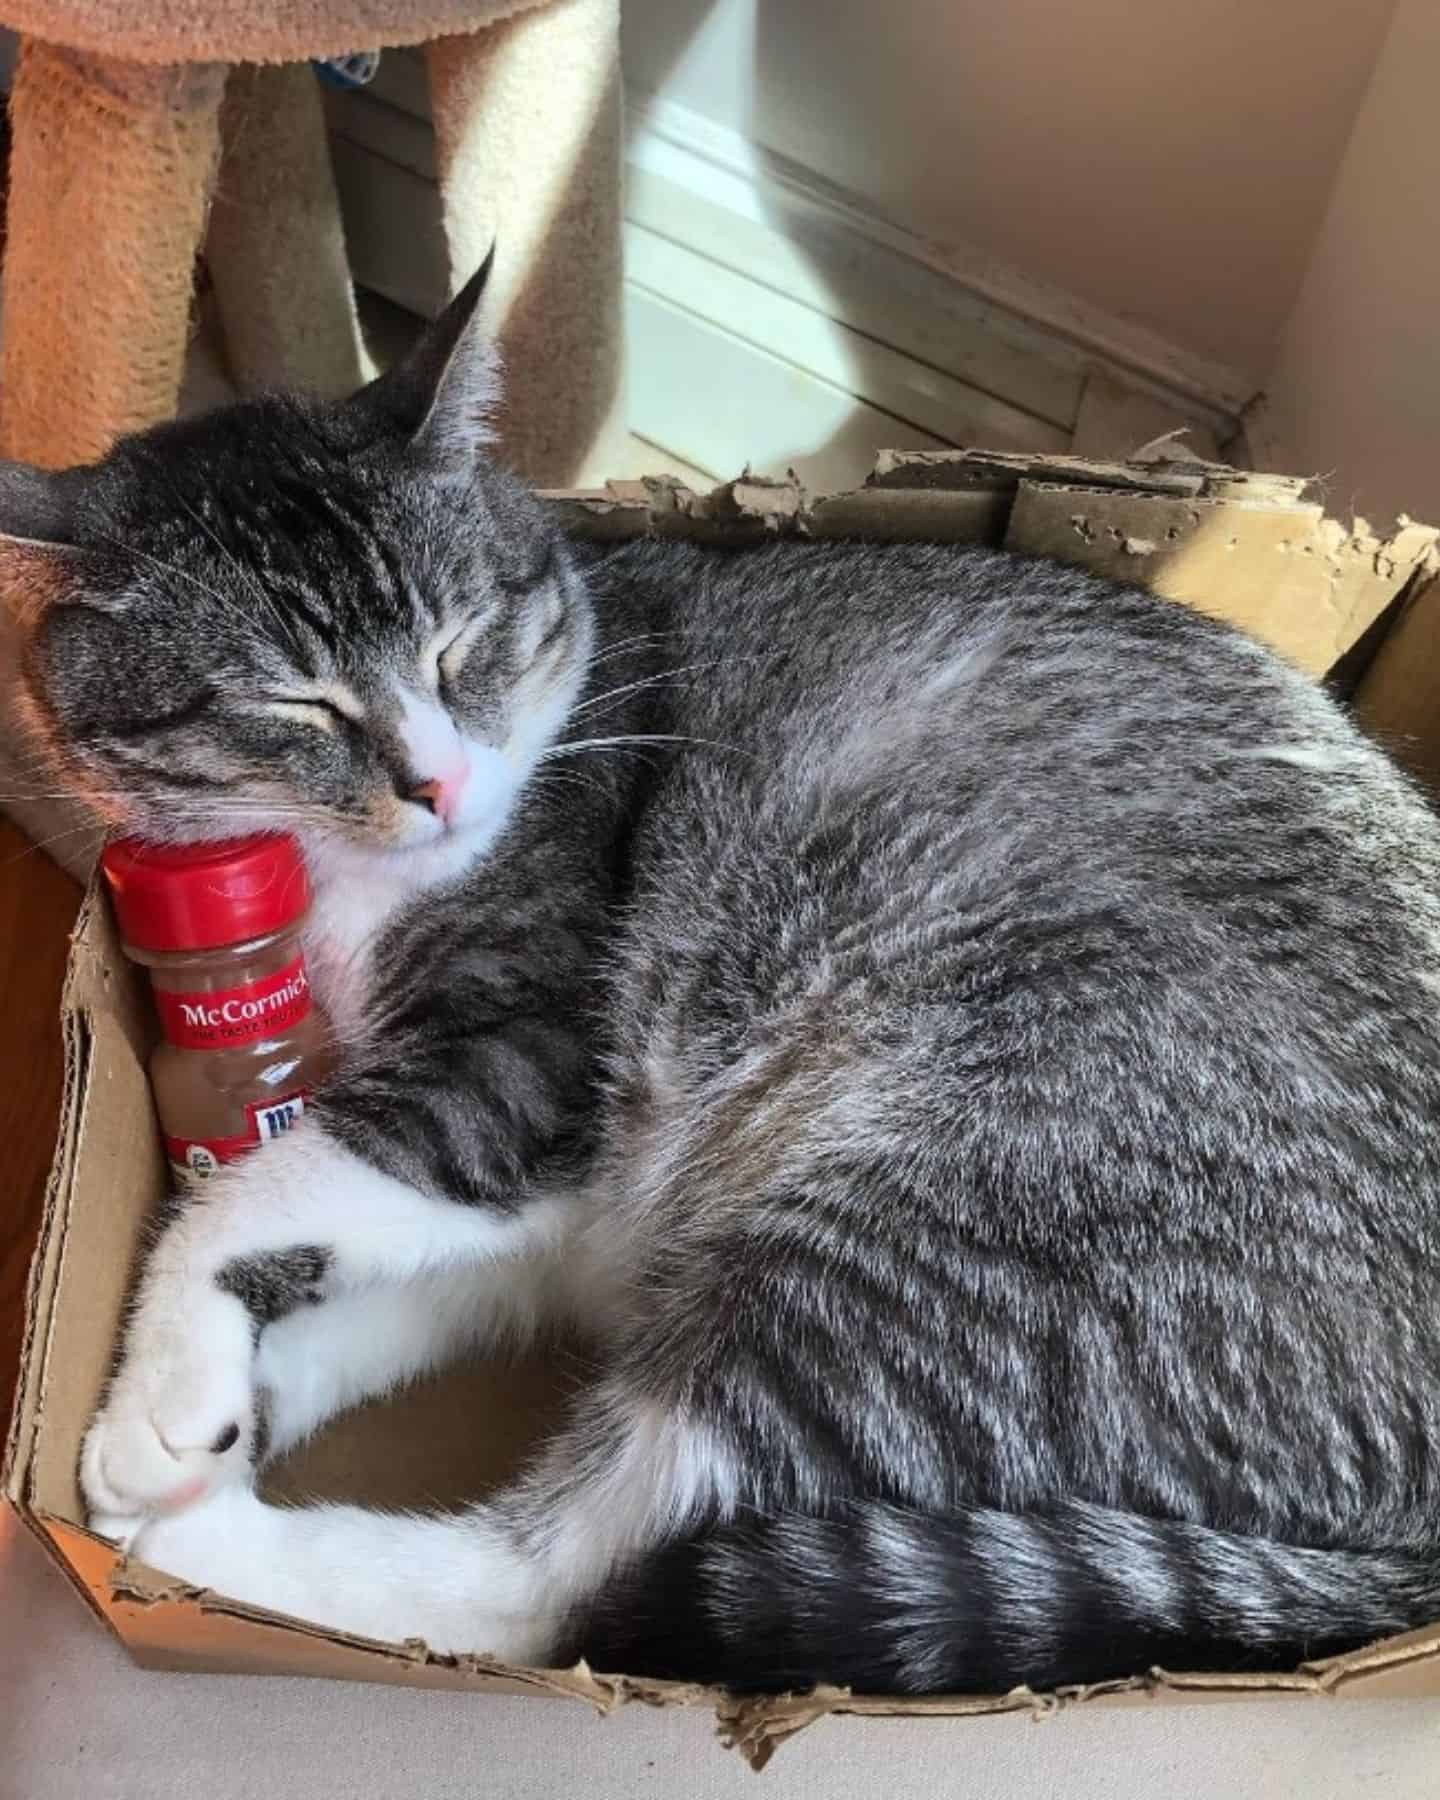 cat sleeping in a box with cinnamon bottle